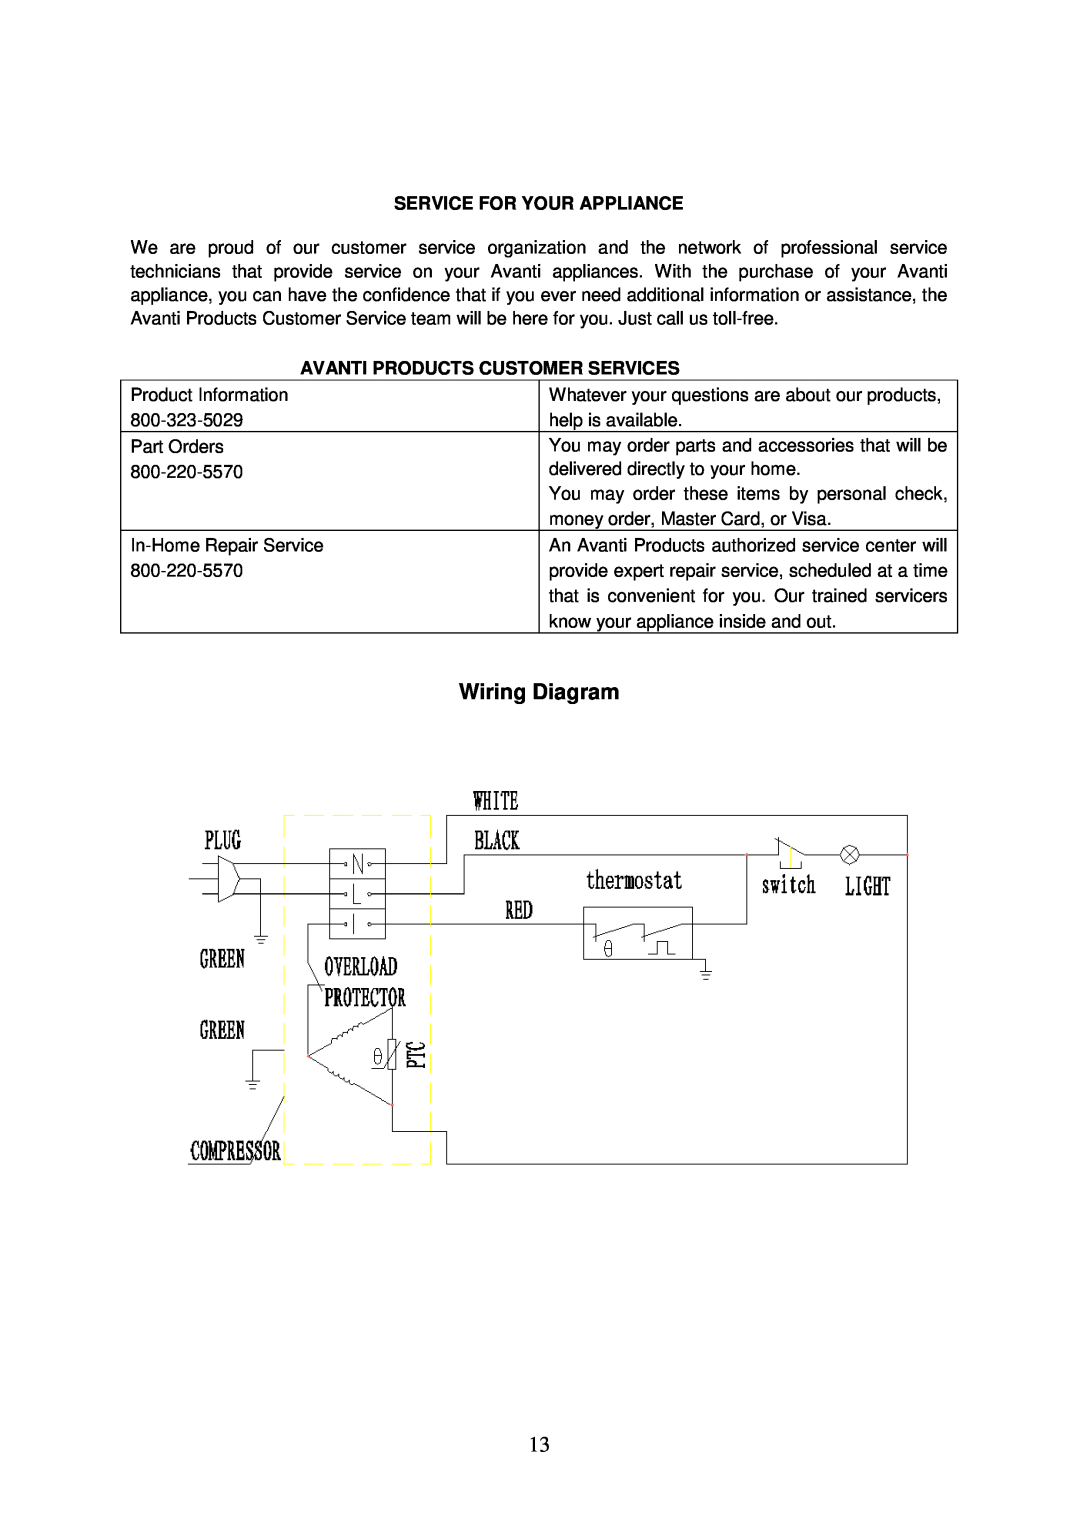 Avanti RA755PST, RA754WT instruction manual Wiring Diagram, Service For Your Appliance, Avanti Products Customer Services 